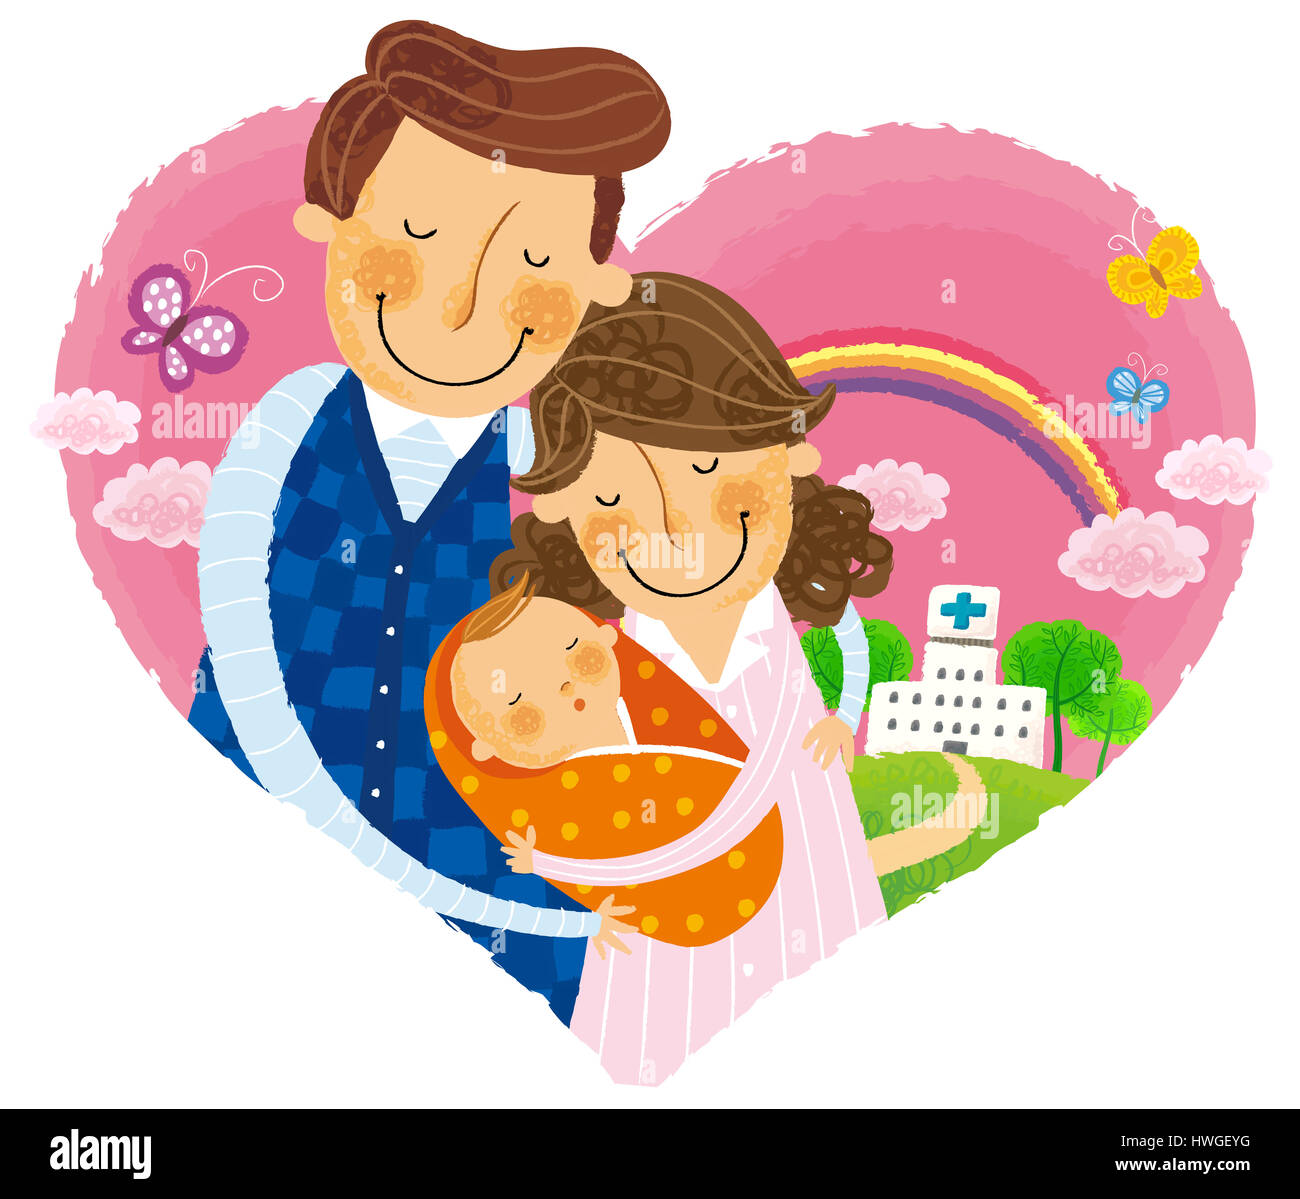 background,white background,white,heart,heart shape,pink,holding,happy,smiling,closed eye,pleasing,new born,baby,infant,wrapped,cloth,casual clothing,clouds,butterfly,rainbow,tree,hospital,exterior,outdoor,outdoors,portrait,close-up,front view,brown,brown hair,building,building exterior,small, around Stock Photo